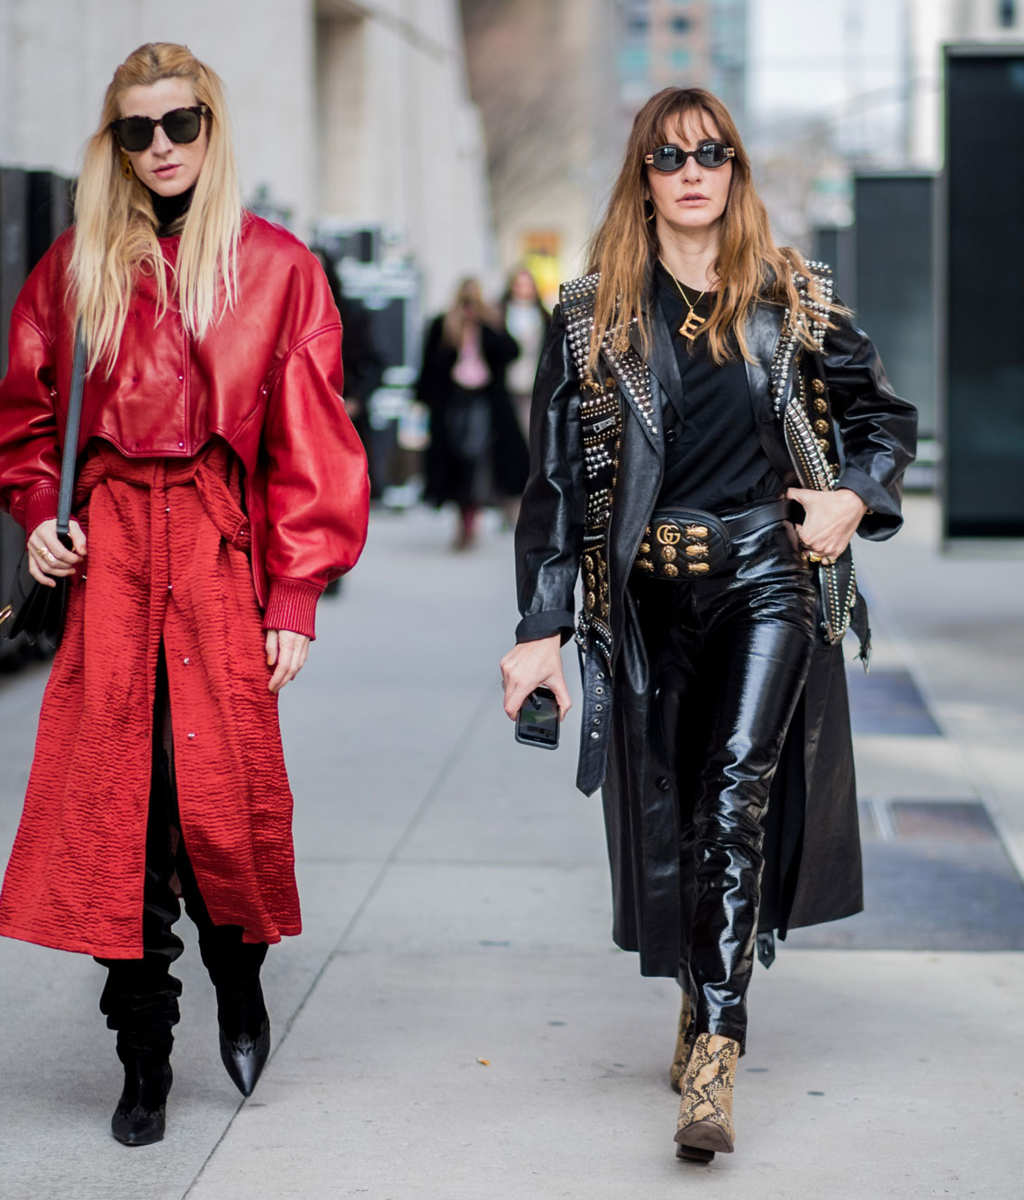 Photographers on the Lack of Diversity in Street Style